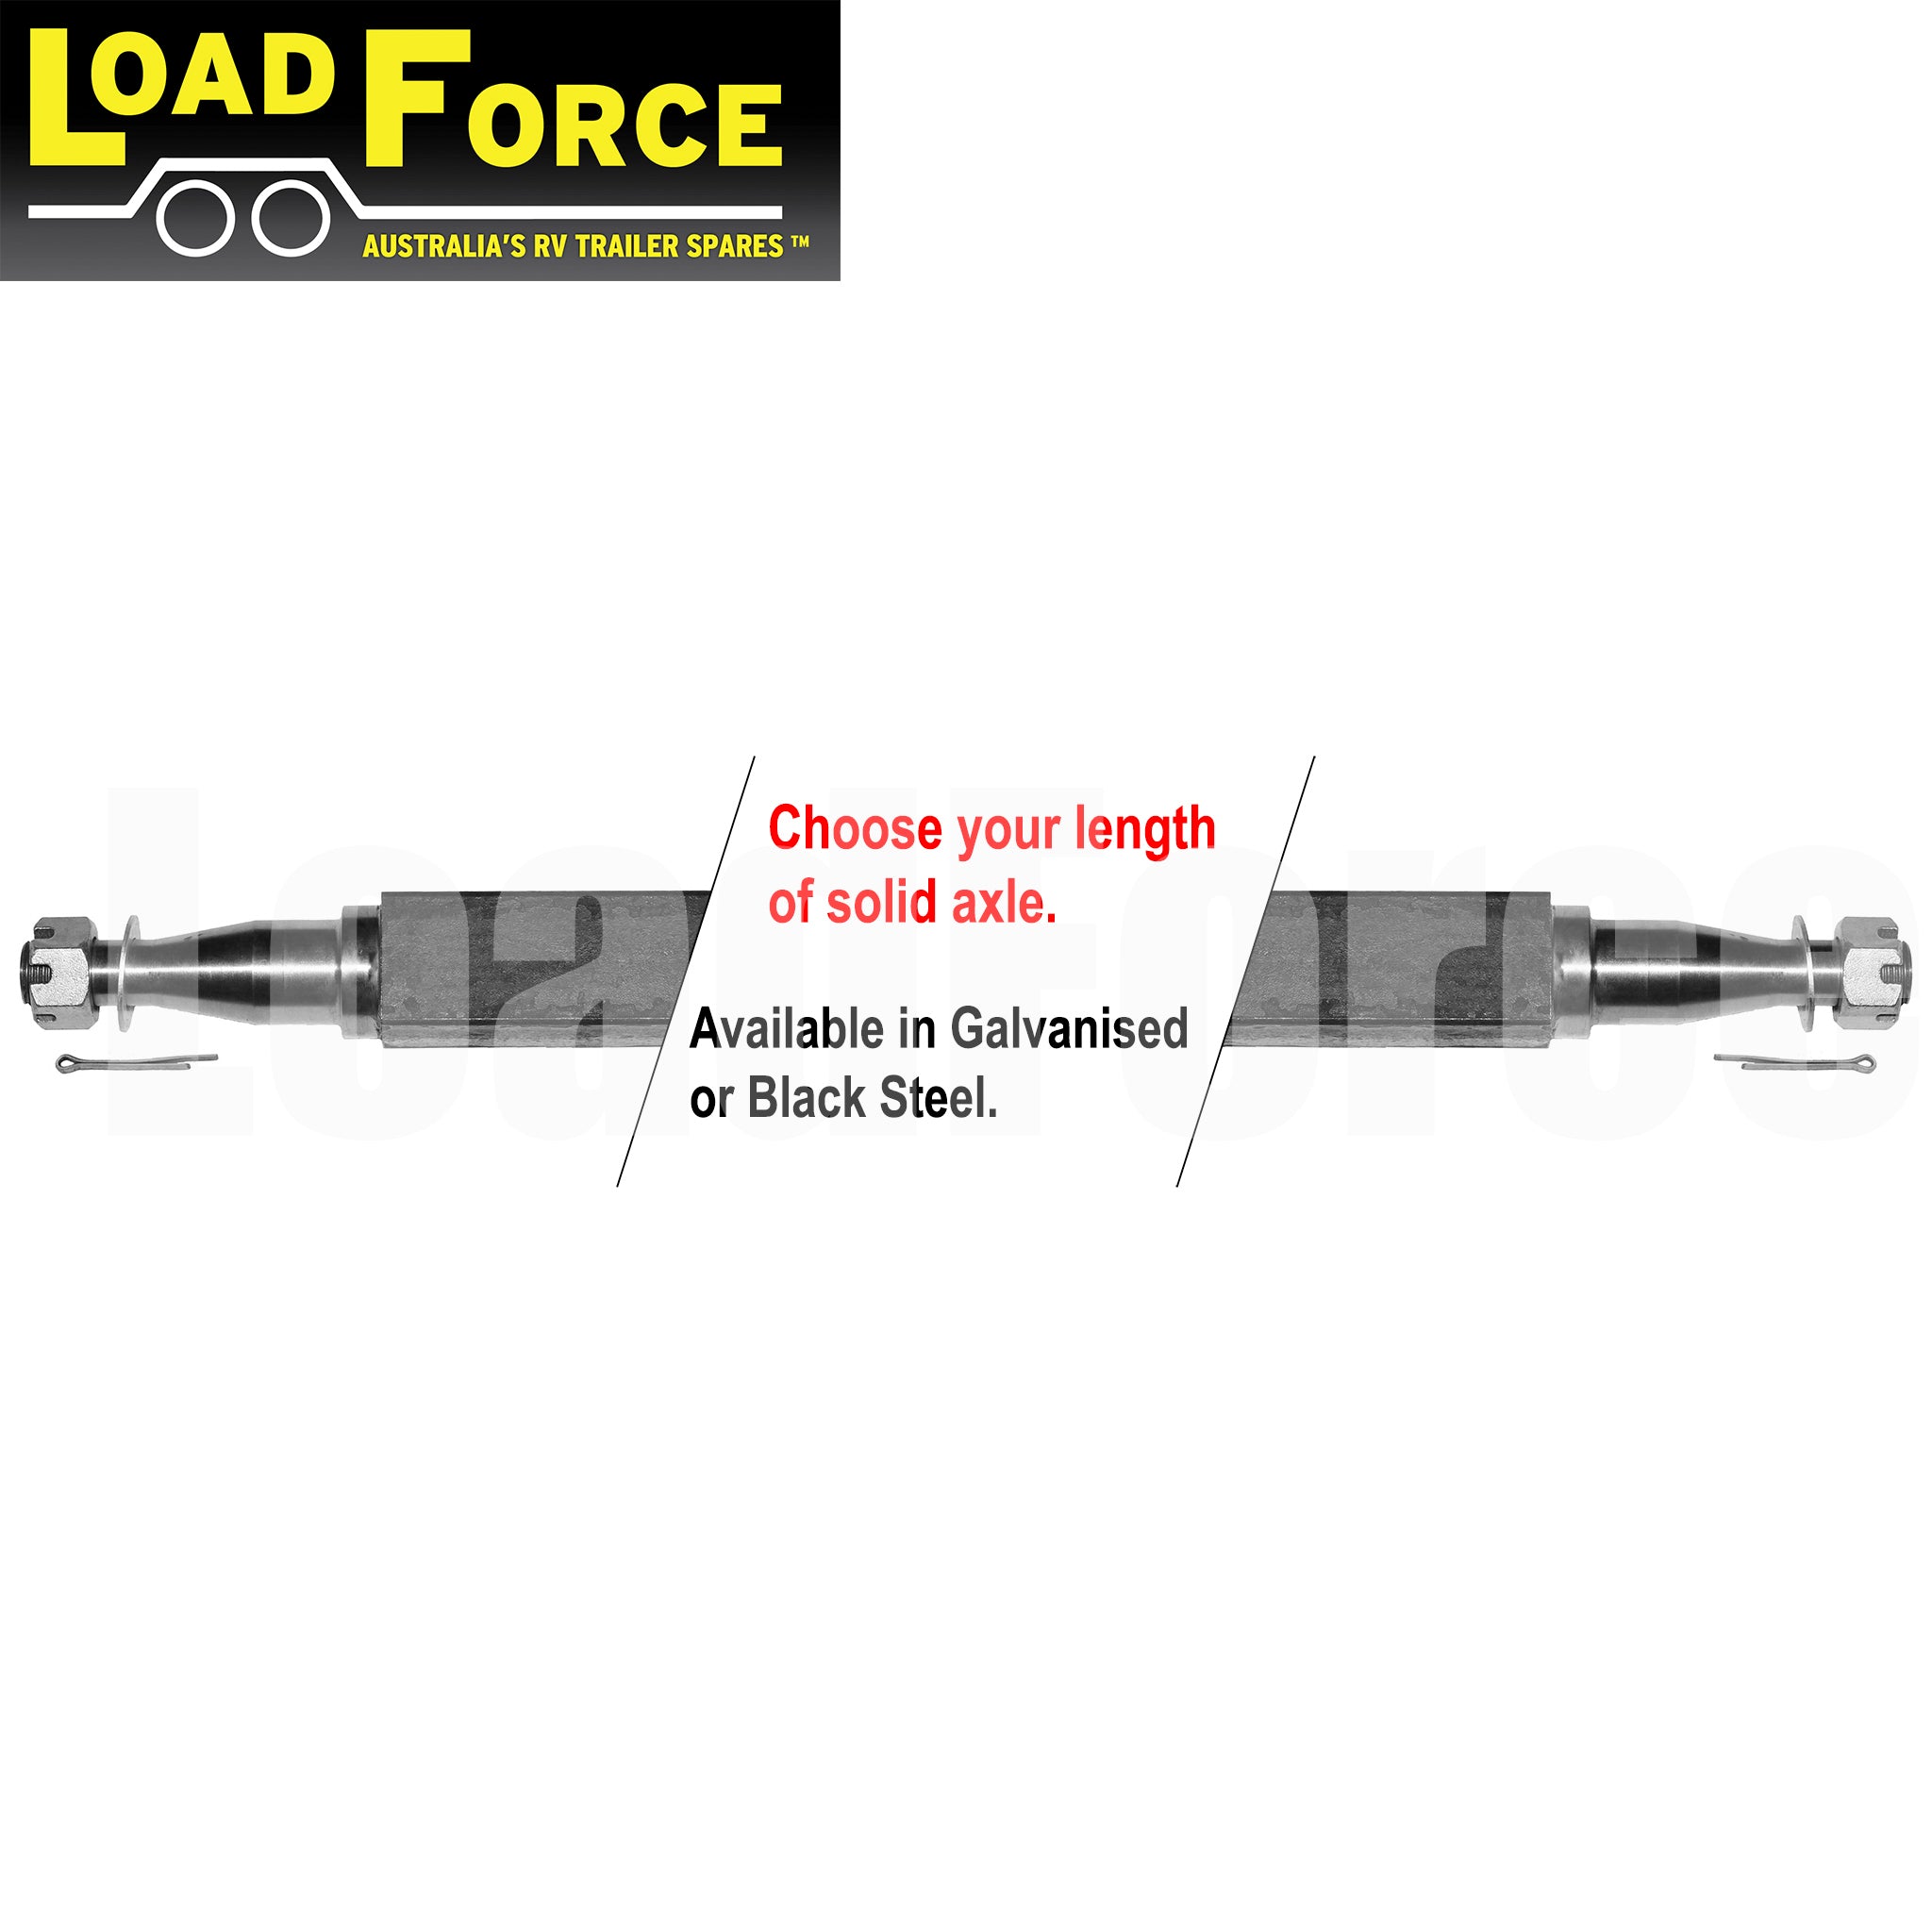 LoadForce Axle 45mm square SL bearing turn 1500kg rating - choose length and finish